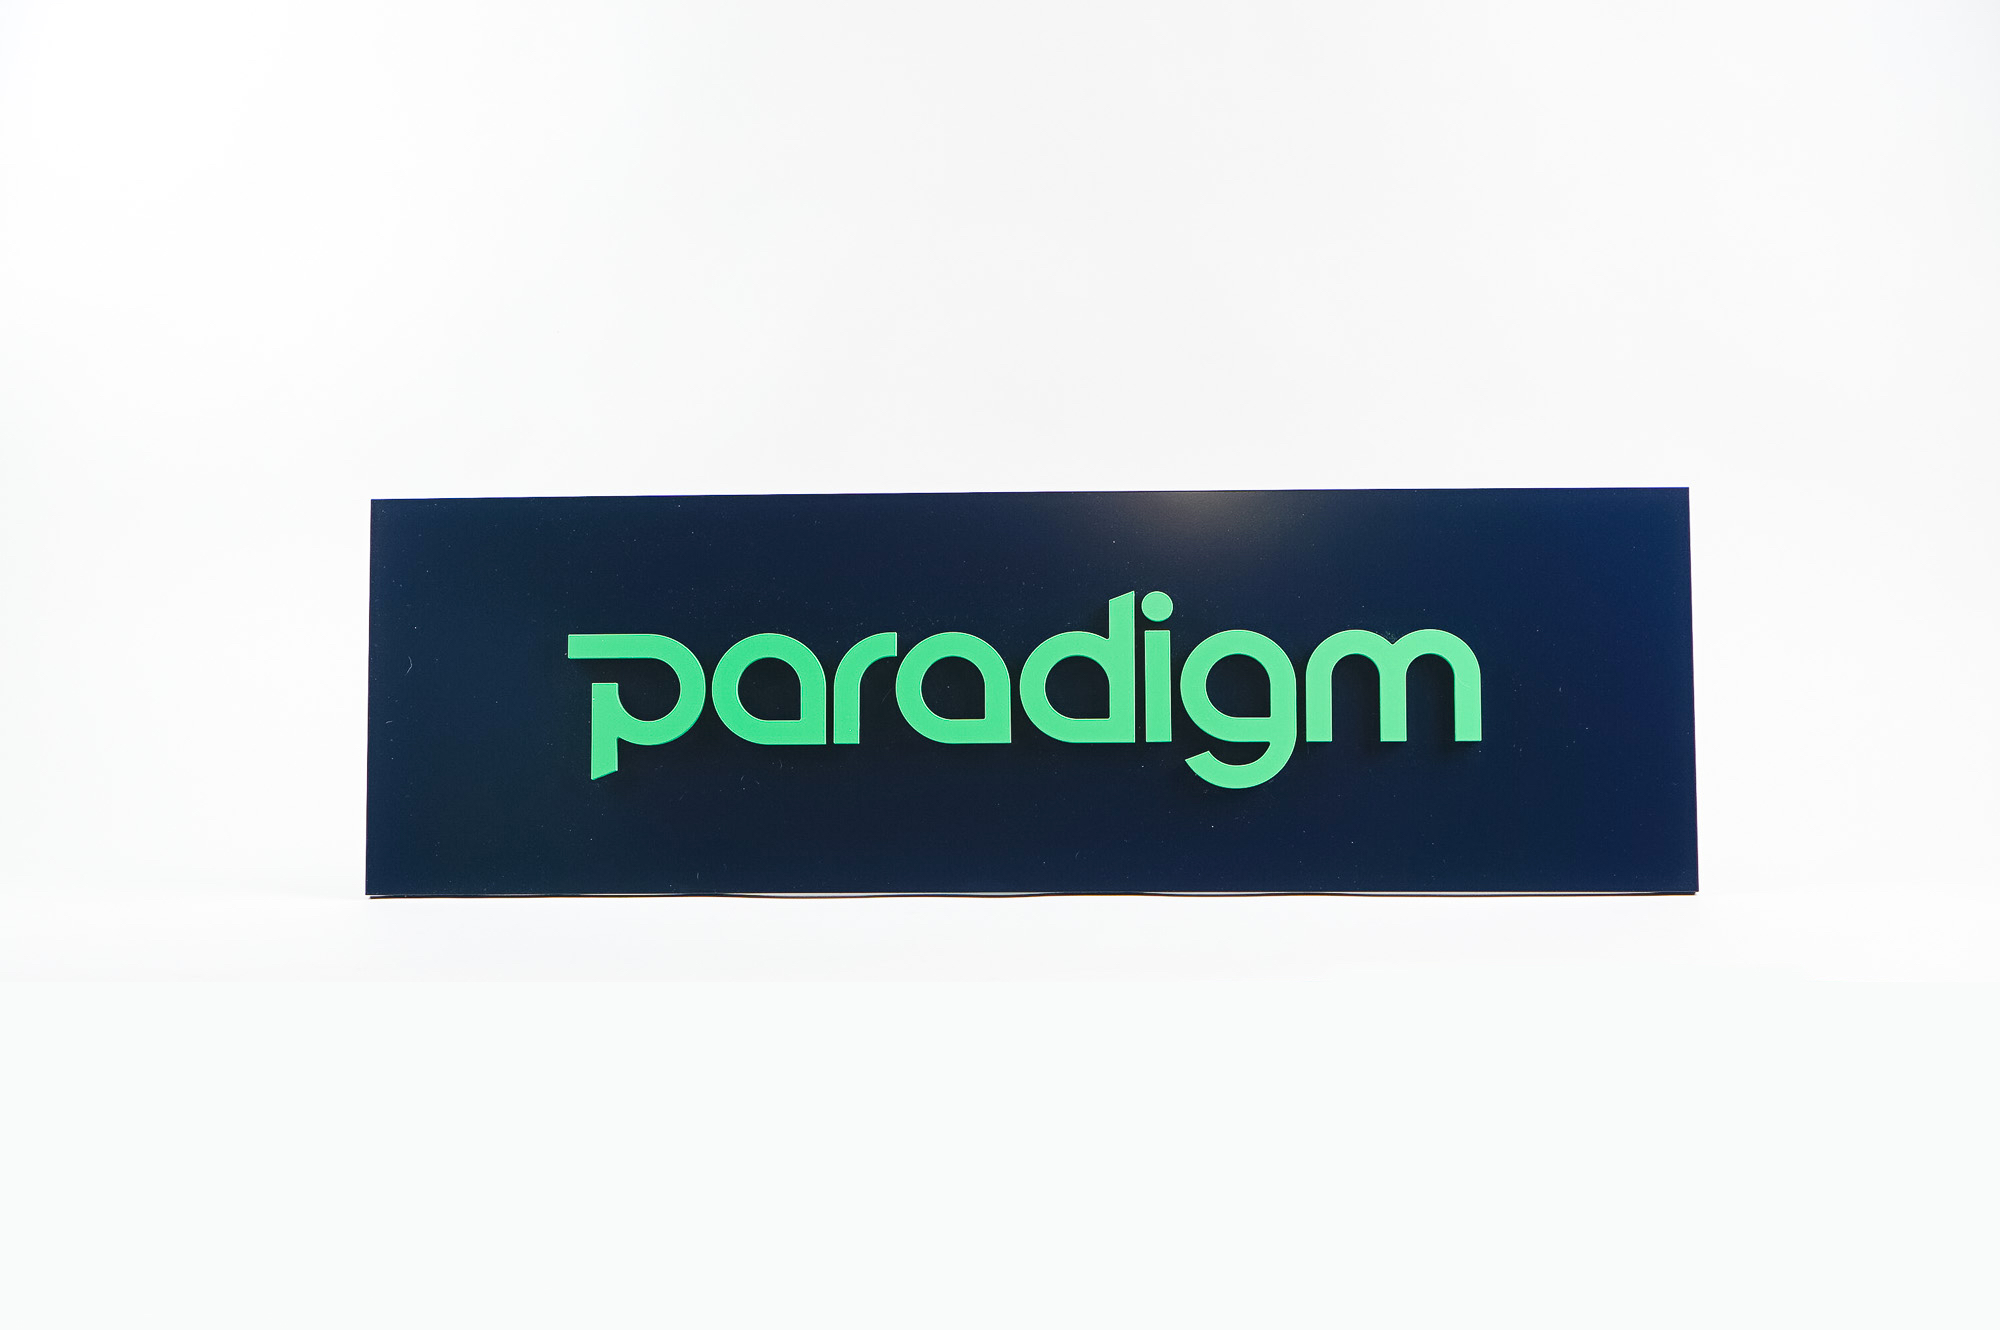 Green and navy, modern, raised text panel sign for Paradigm, a tech company currently located at WeWork in Oakland, CA.